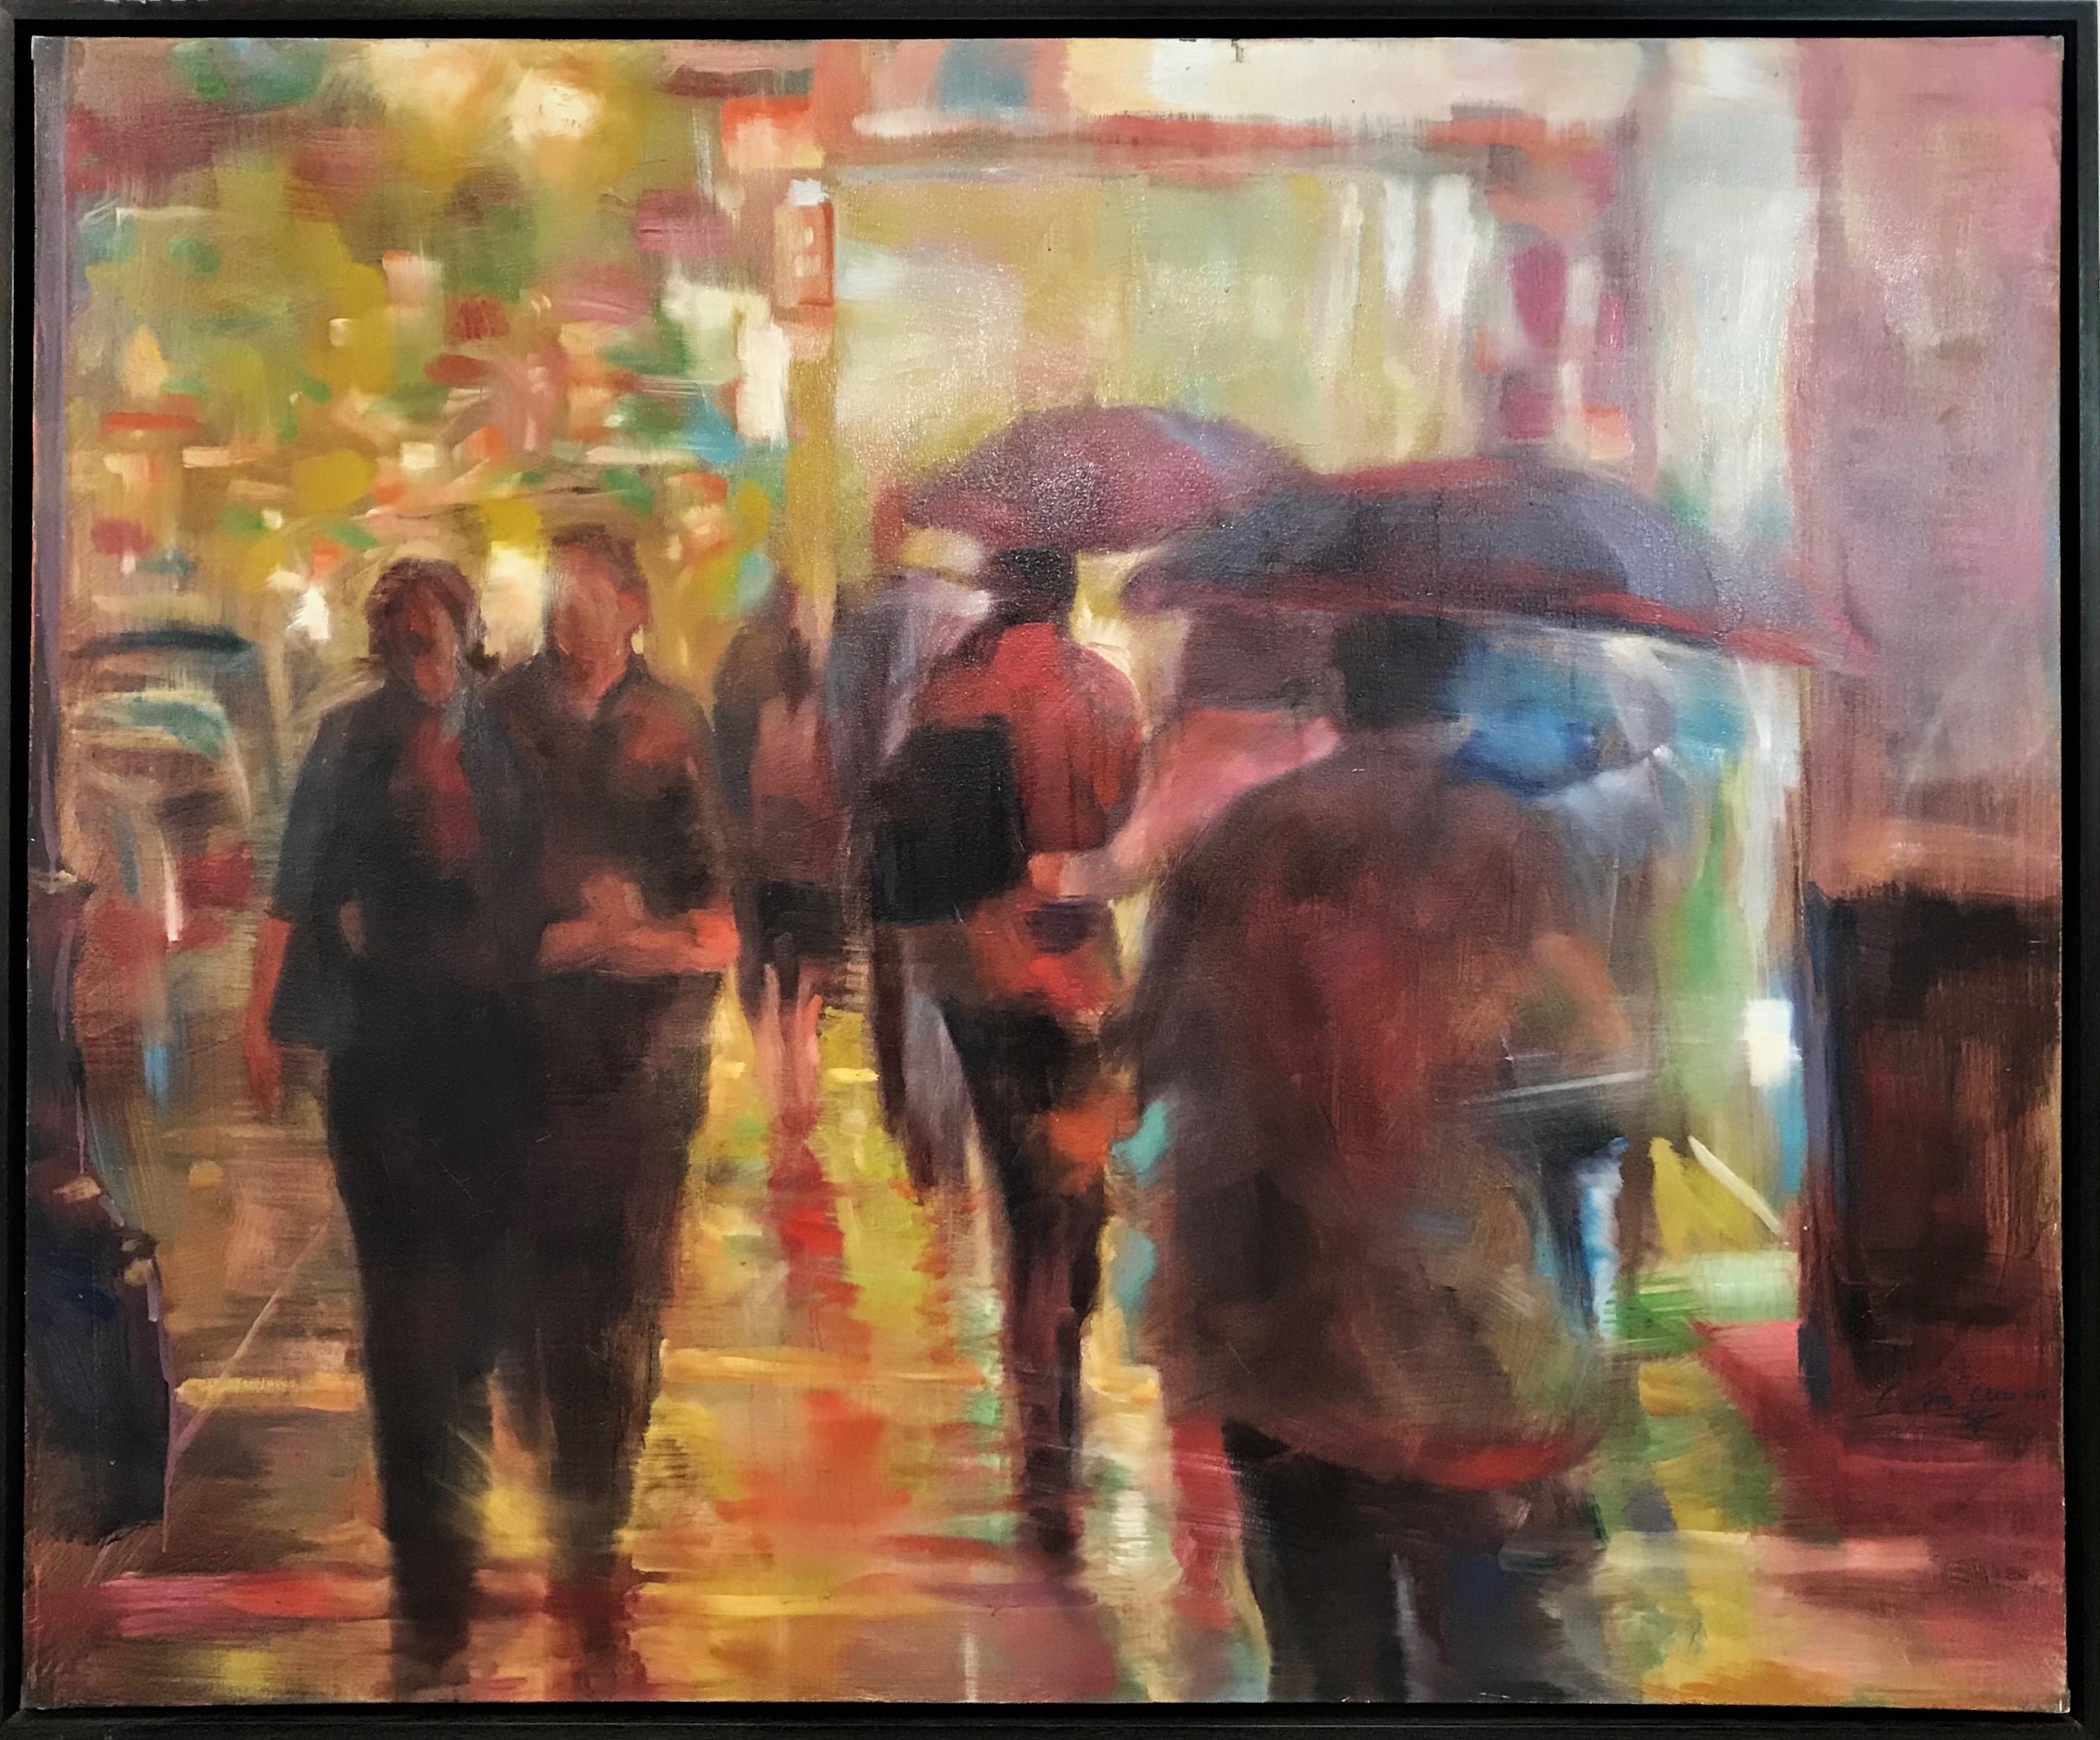 Signed and dated lower right.
Titled ‘Neon Crowd’ en verso.
Medium: oil on canvas

Dimensions (unframed): 55” height x 67” wide
Dimensions (framed): 57” height x 69” wide

Jih-Chin Wu (Taiwanese, born 1971) is internationally renowned